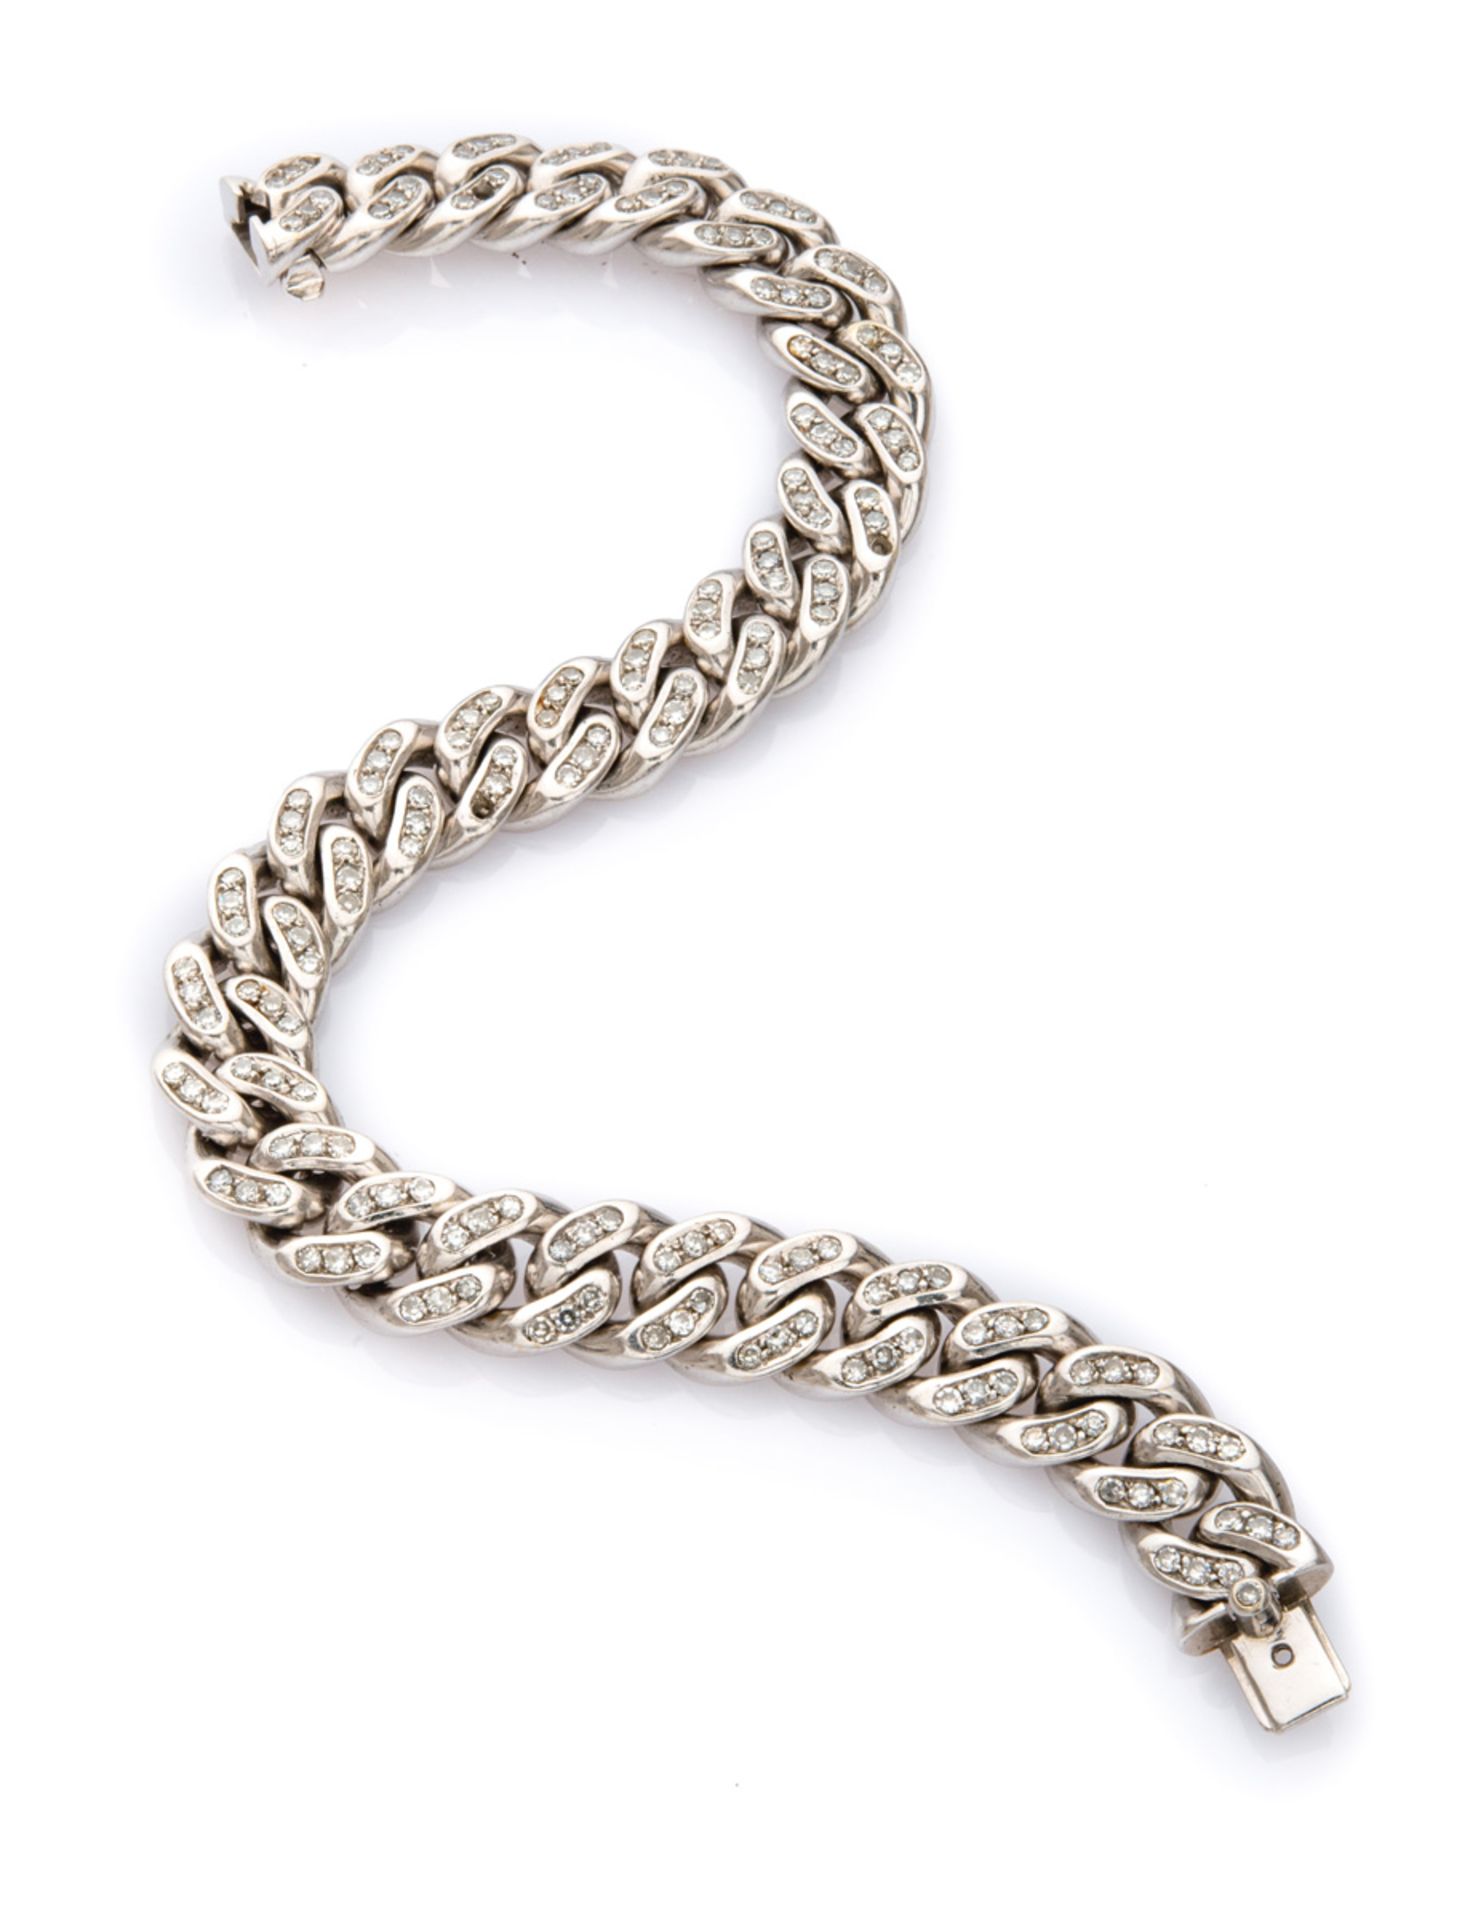 BEAUTIFUL BRACELET in white gold 18 kts., chain motif with inset wit wit cut diamond and concealed